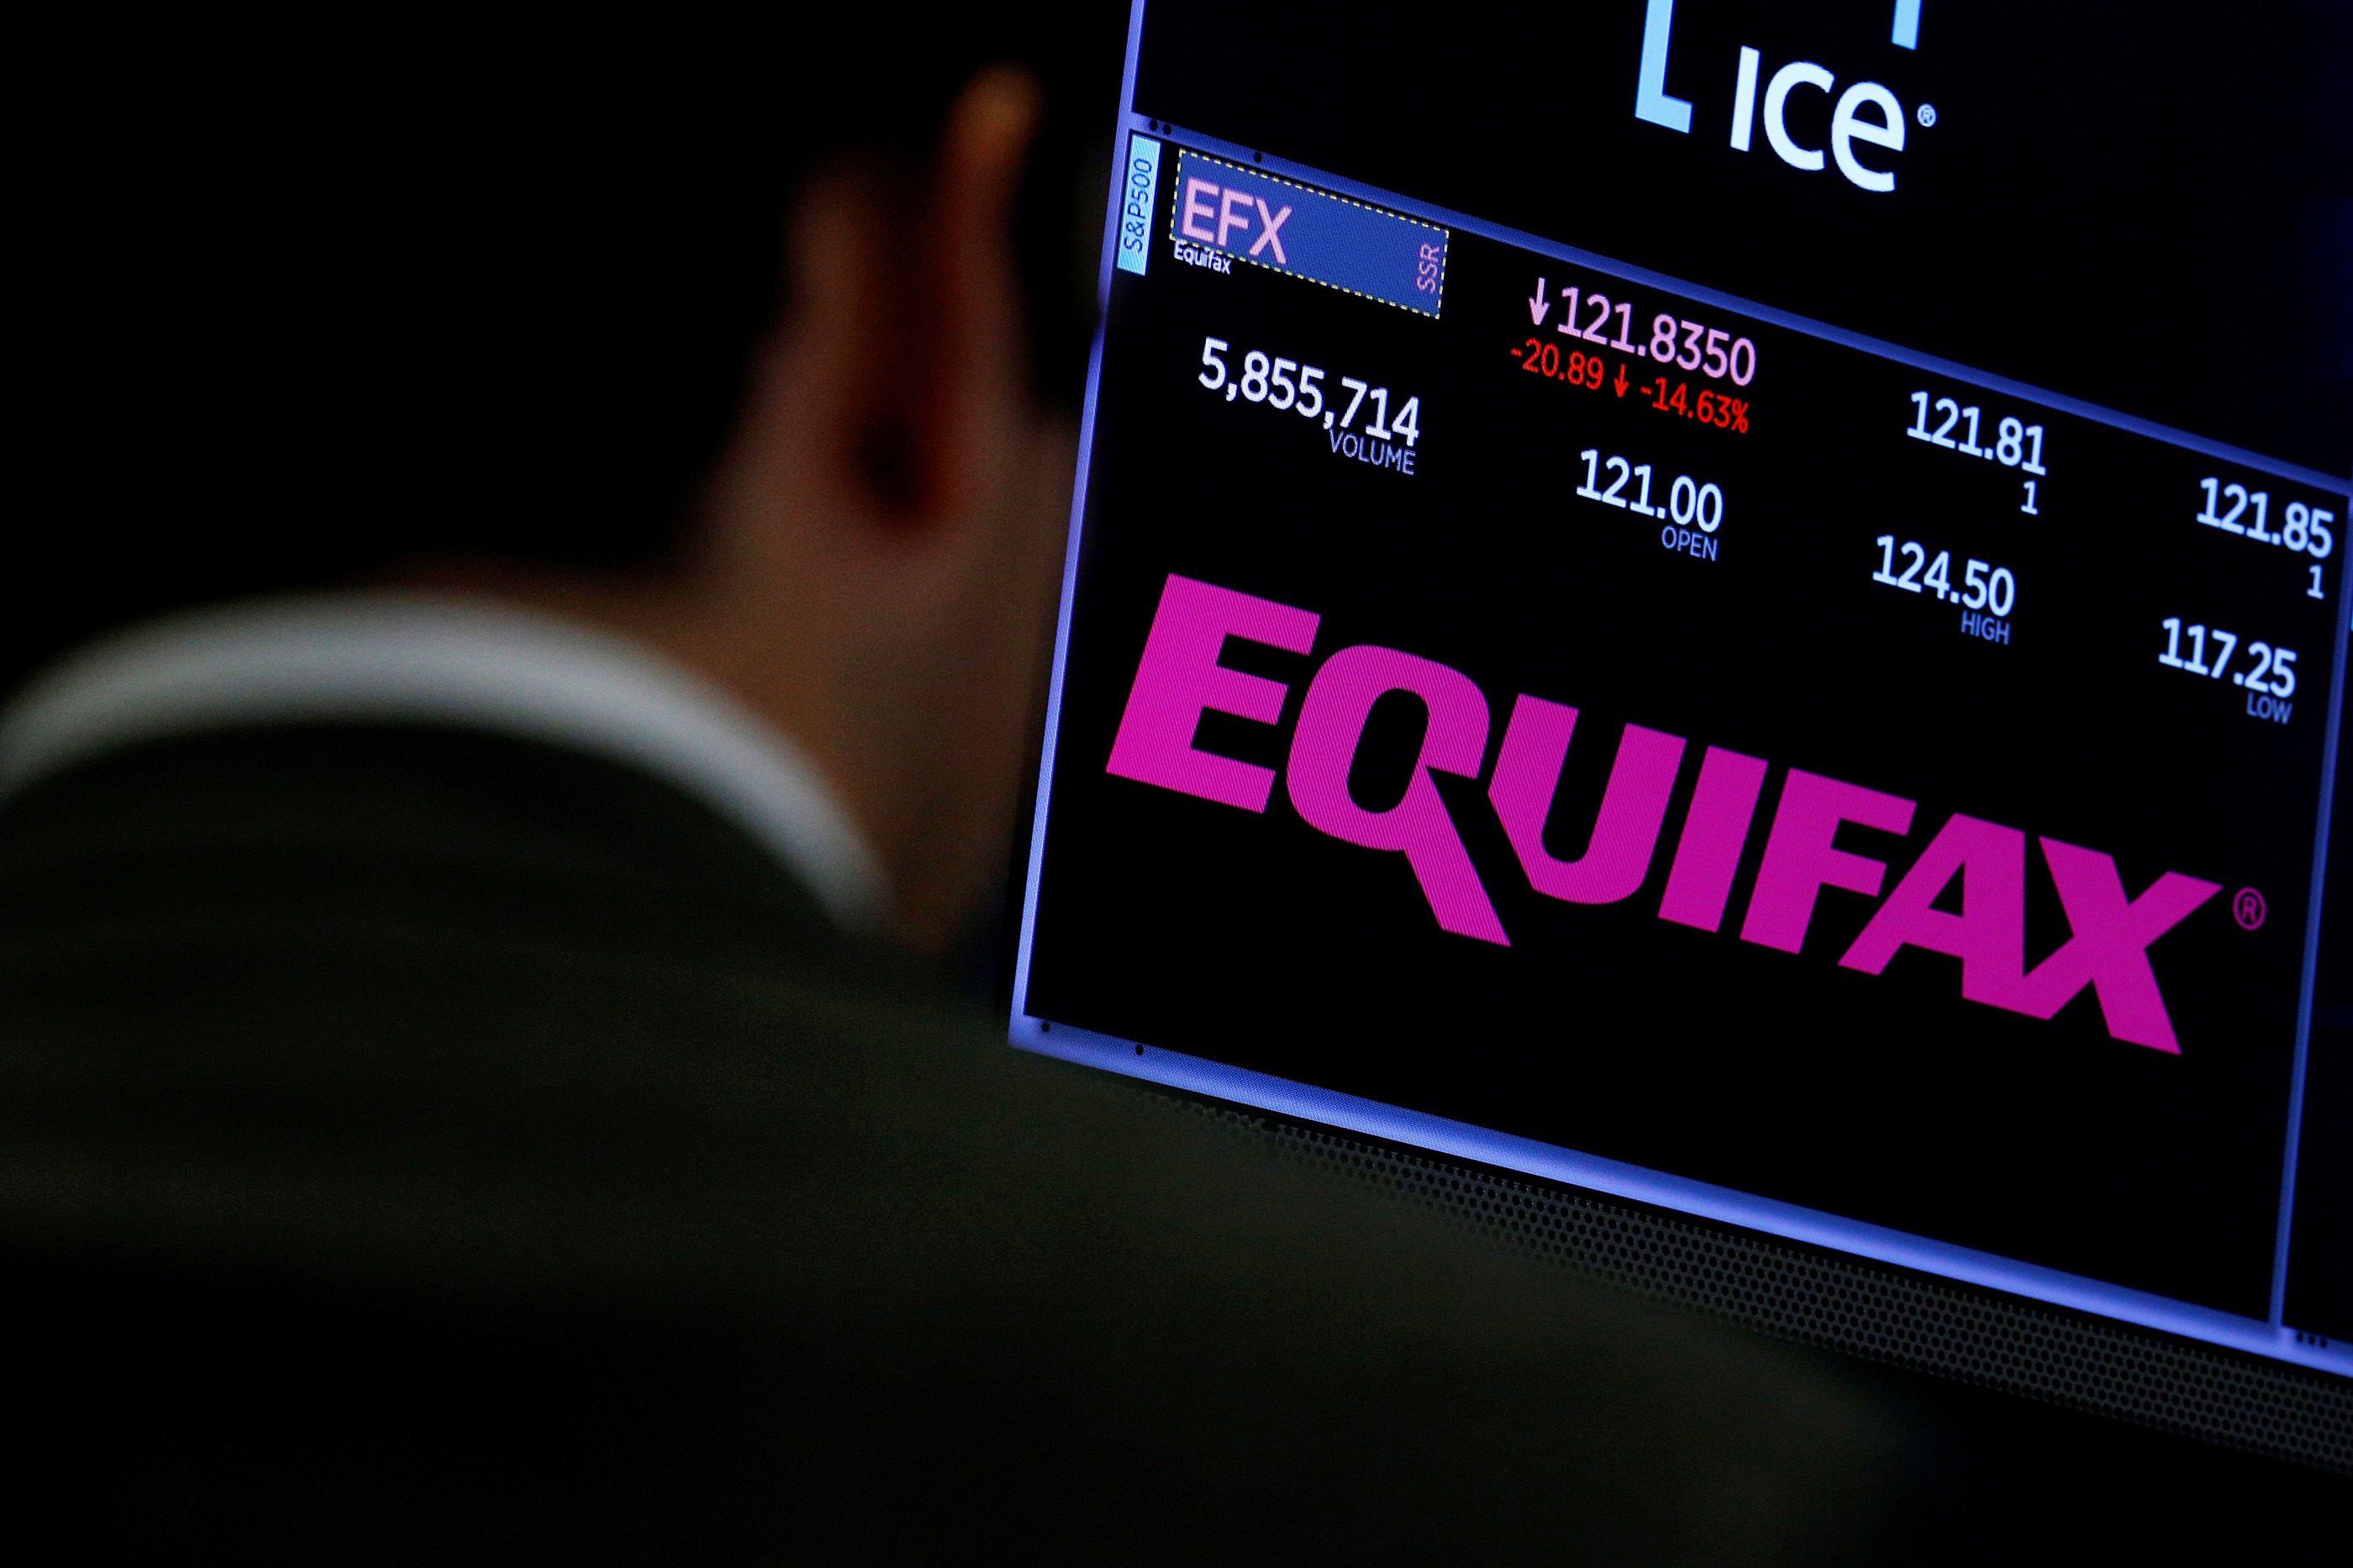 7 Questions You Must Keep Asking About the Equifax Hack